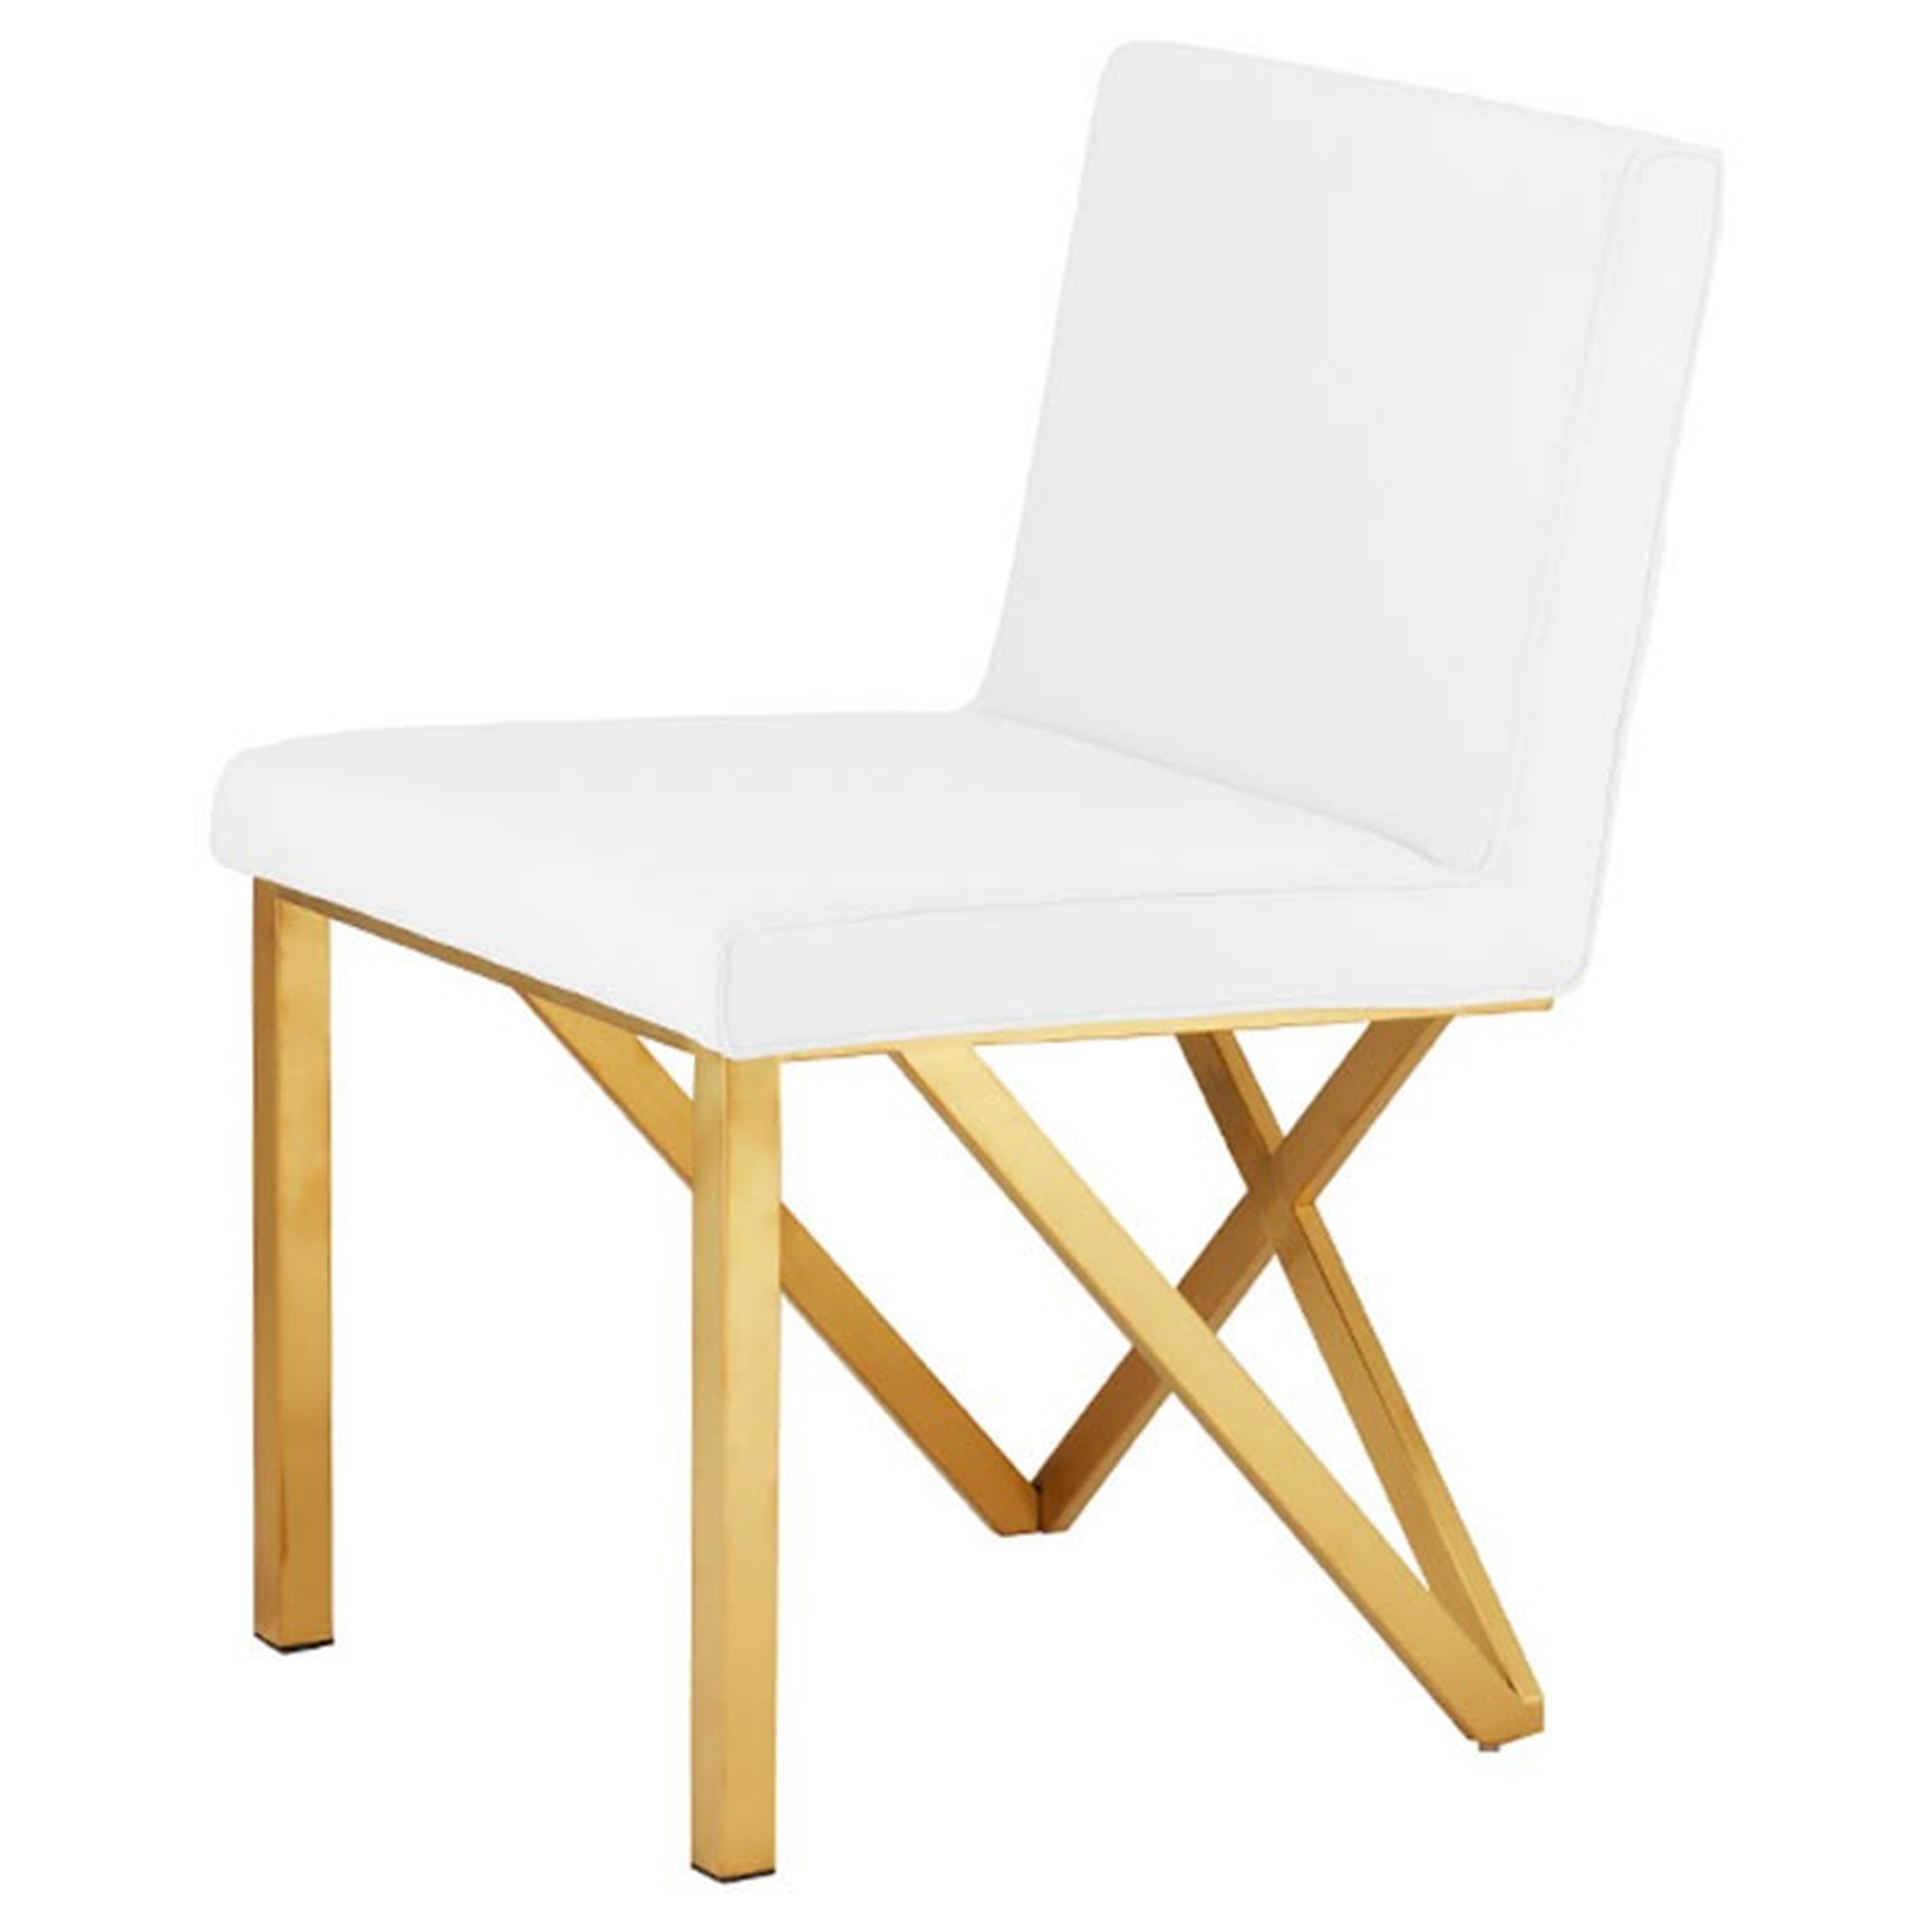 Criss Cross Dining Chair Gold White, White Leather Parson Chairs